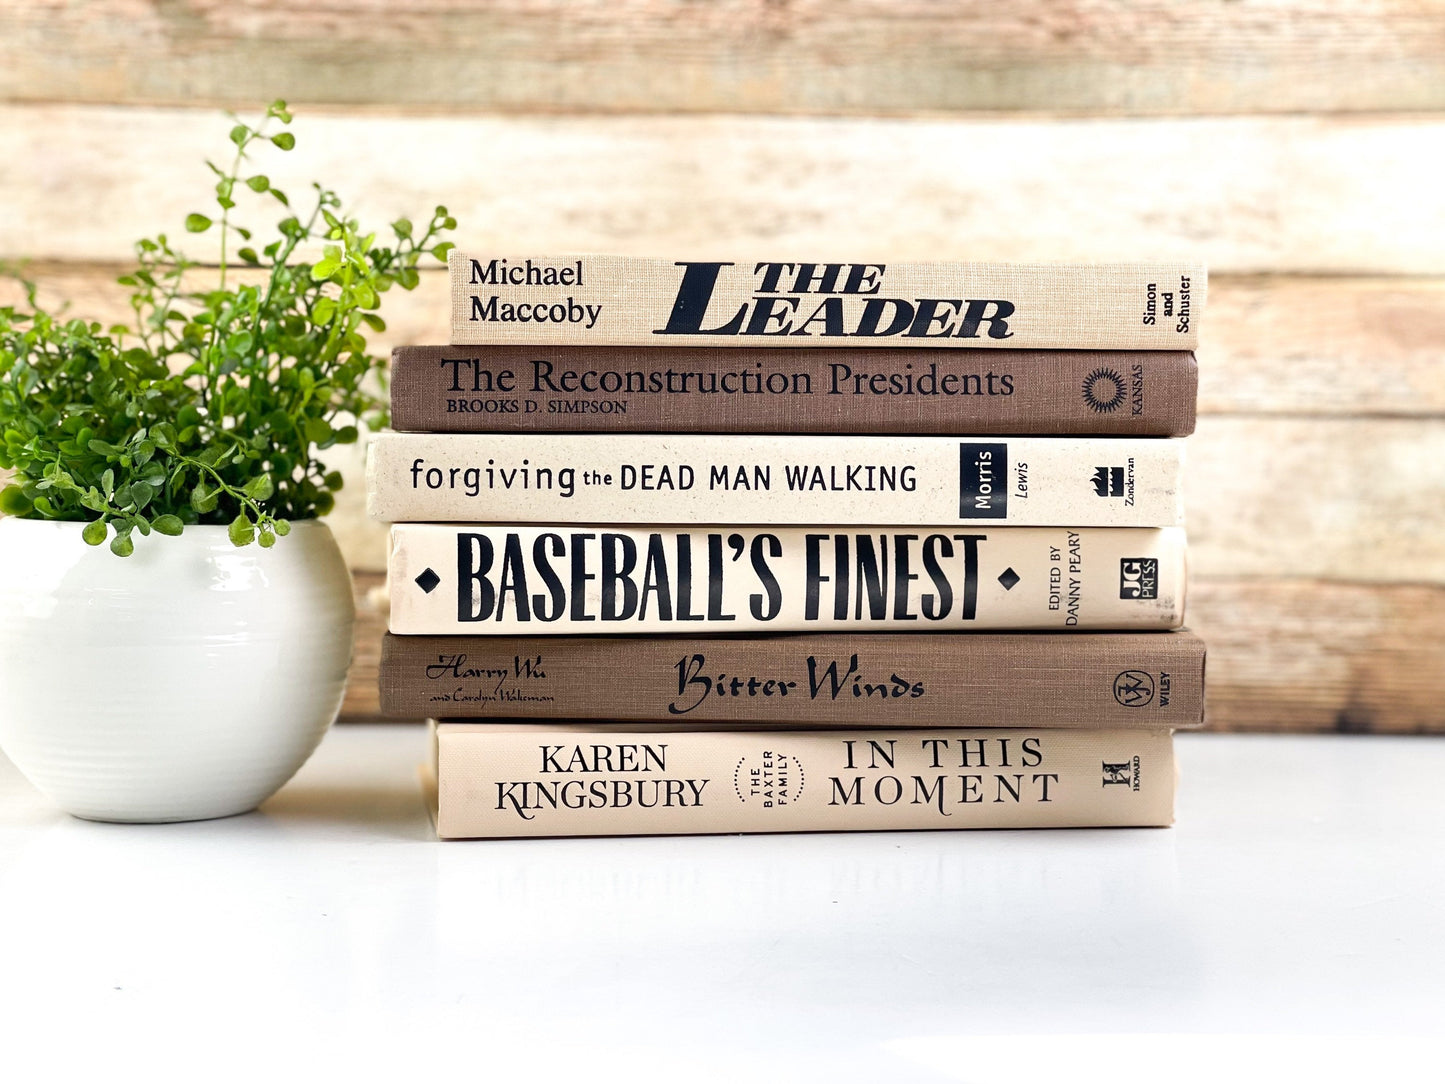 Brown and Cream Set of Books